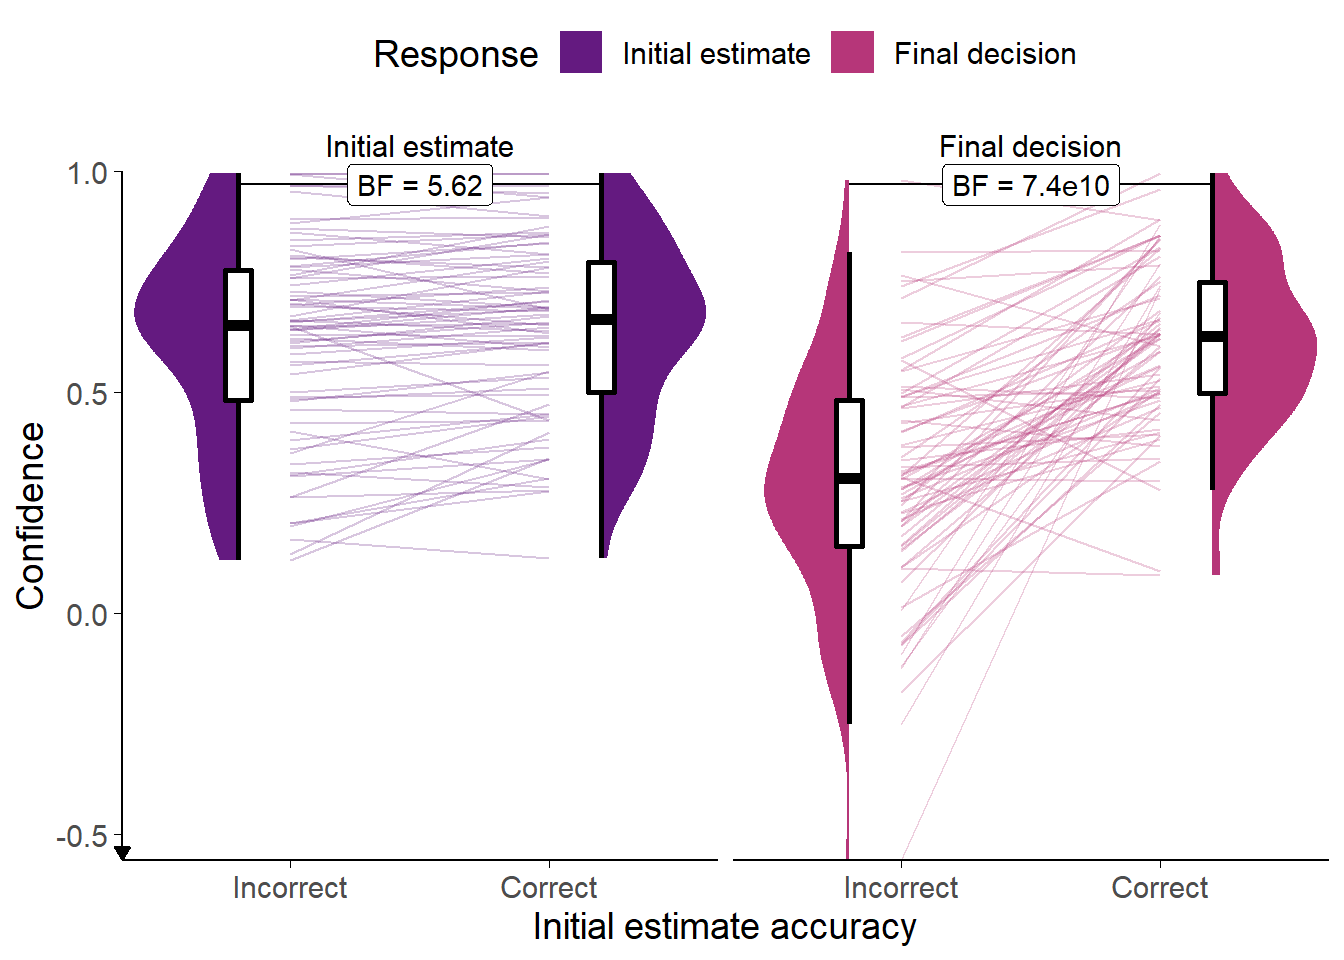 Confidence for the Dates task with dis/agreeing advisors.<br/> Faint lines show individual participant means, for which the violin and box plots show the distributions. Final confidence is negative where the answer side changes. Theoretical range of confidence scores is initial: [0,1]; final: [-1,1].